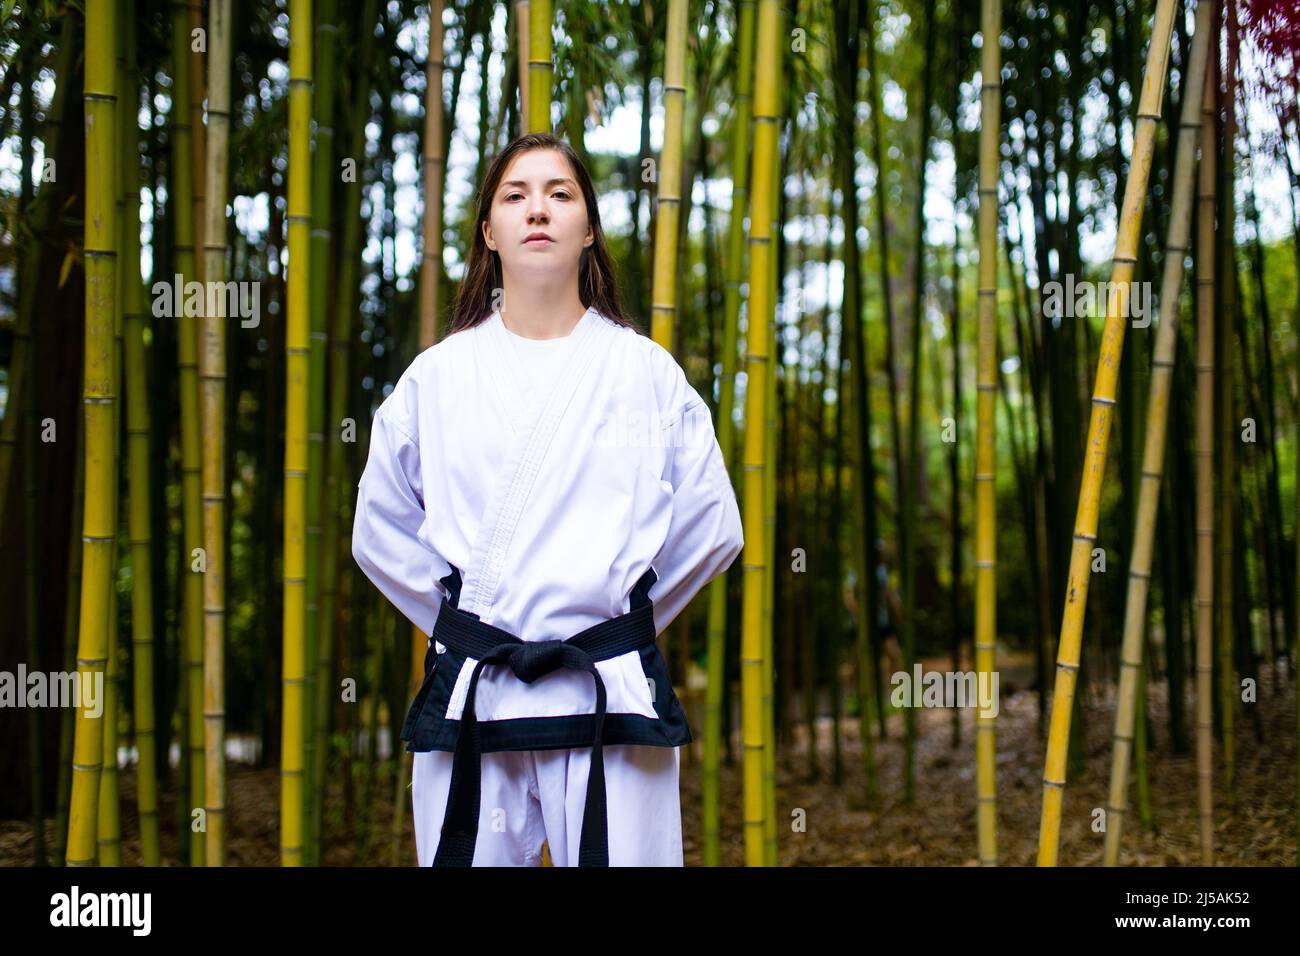 A young woman with a black belt coaches in martial art outdoor bamboo background Stock Photo